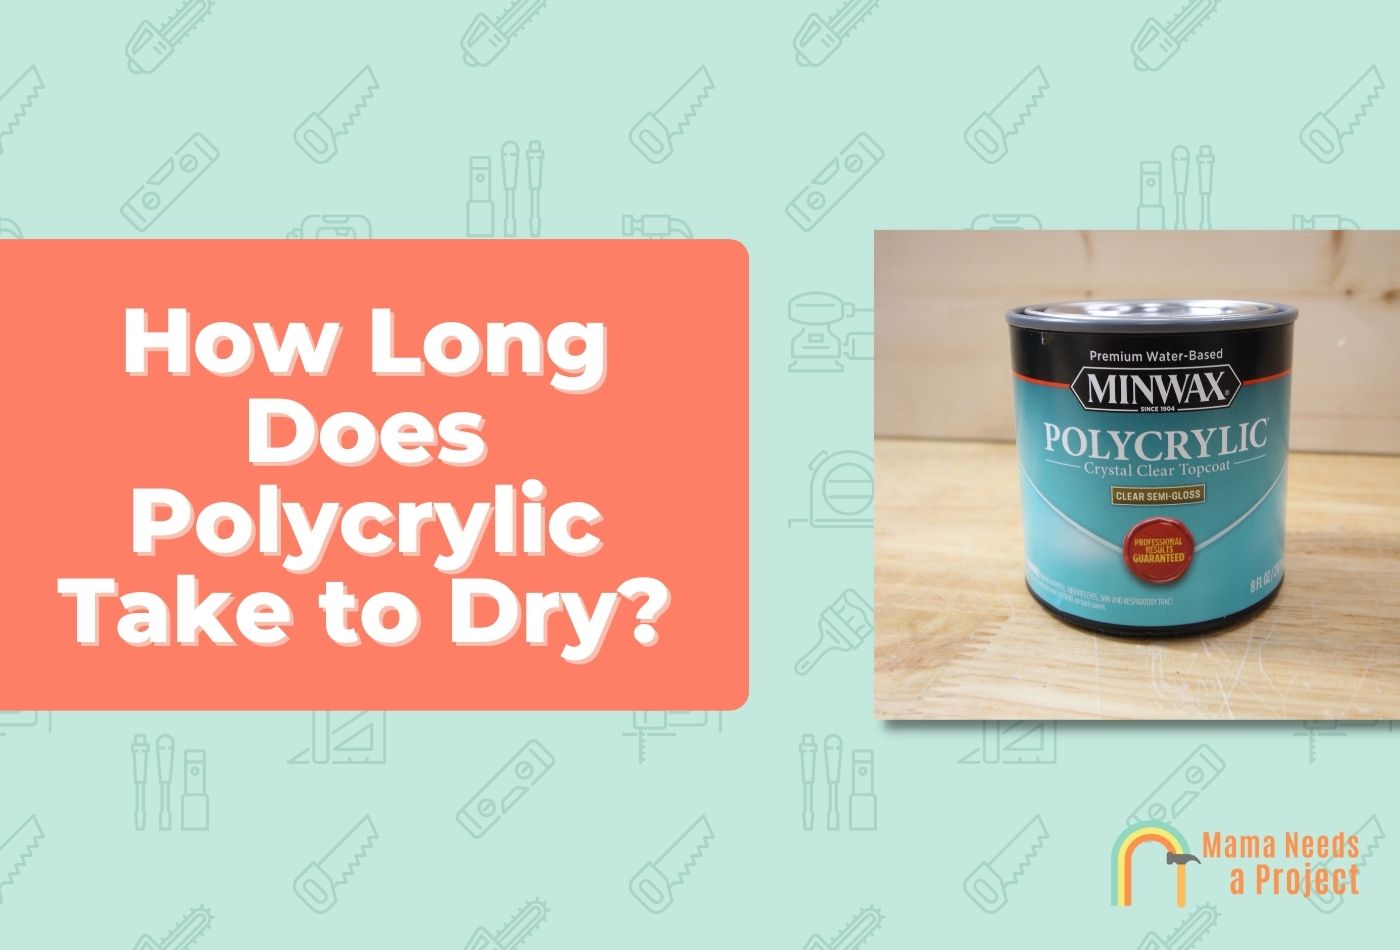 How Long Does Polycrylic Take to Dry